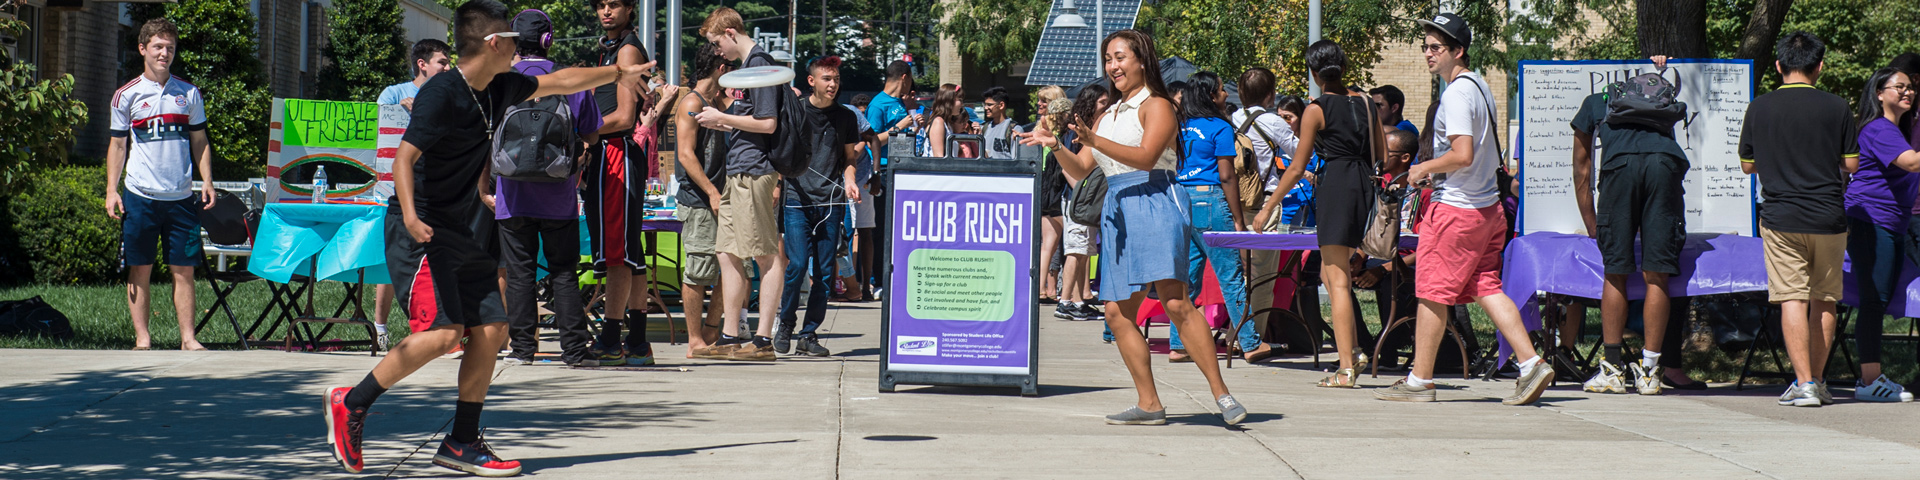 Club Rush on the Rockville campus